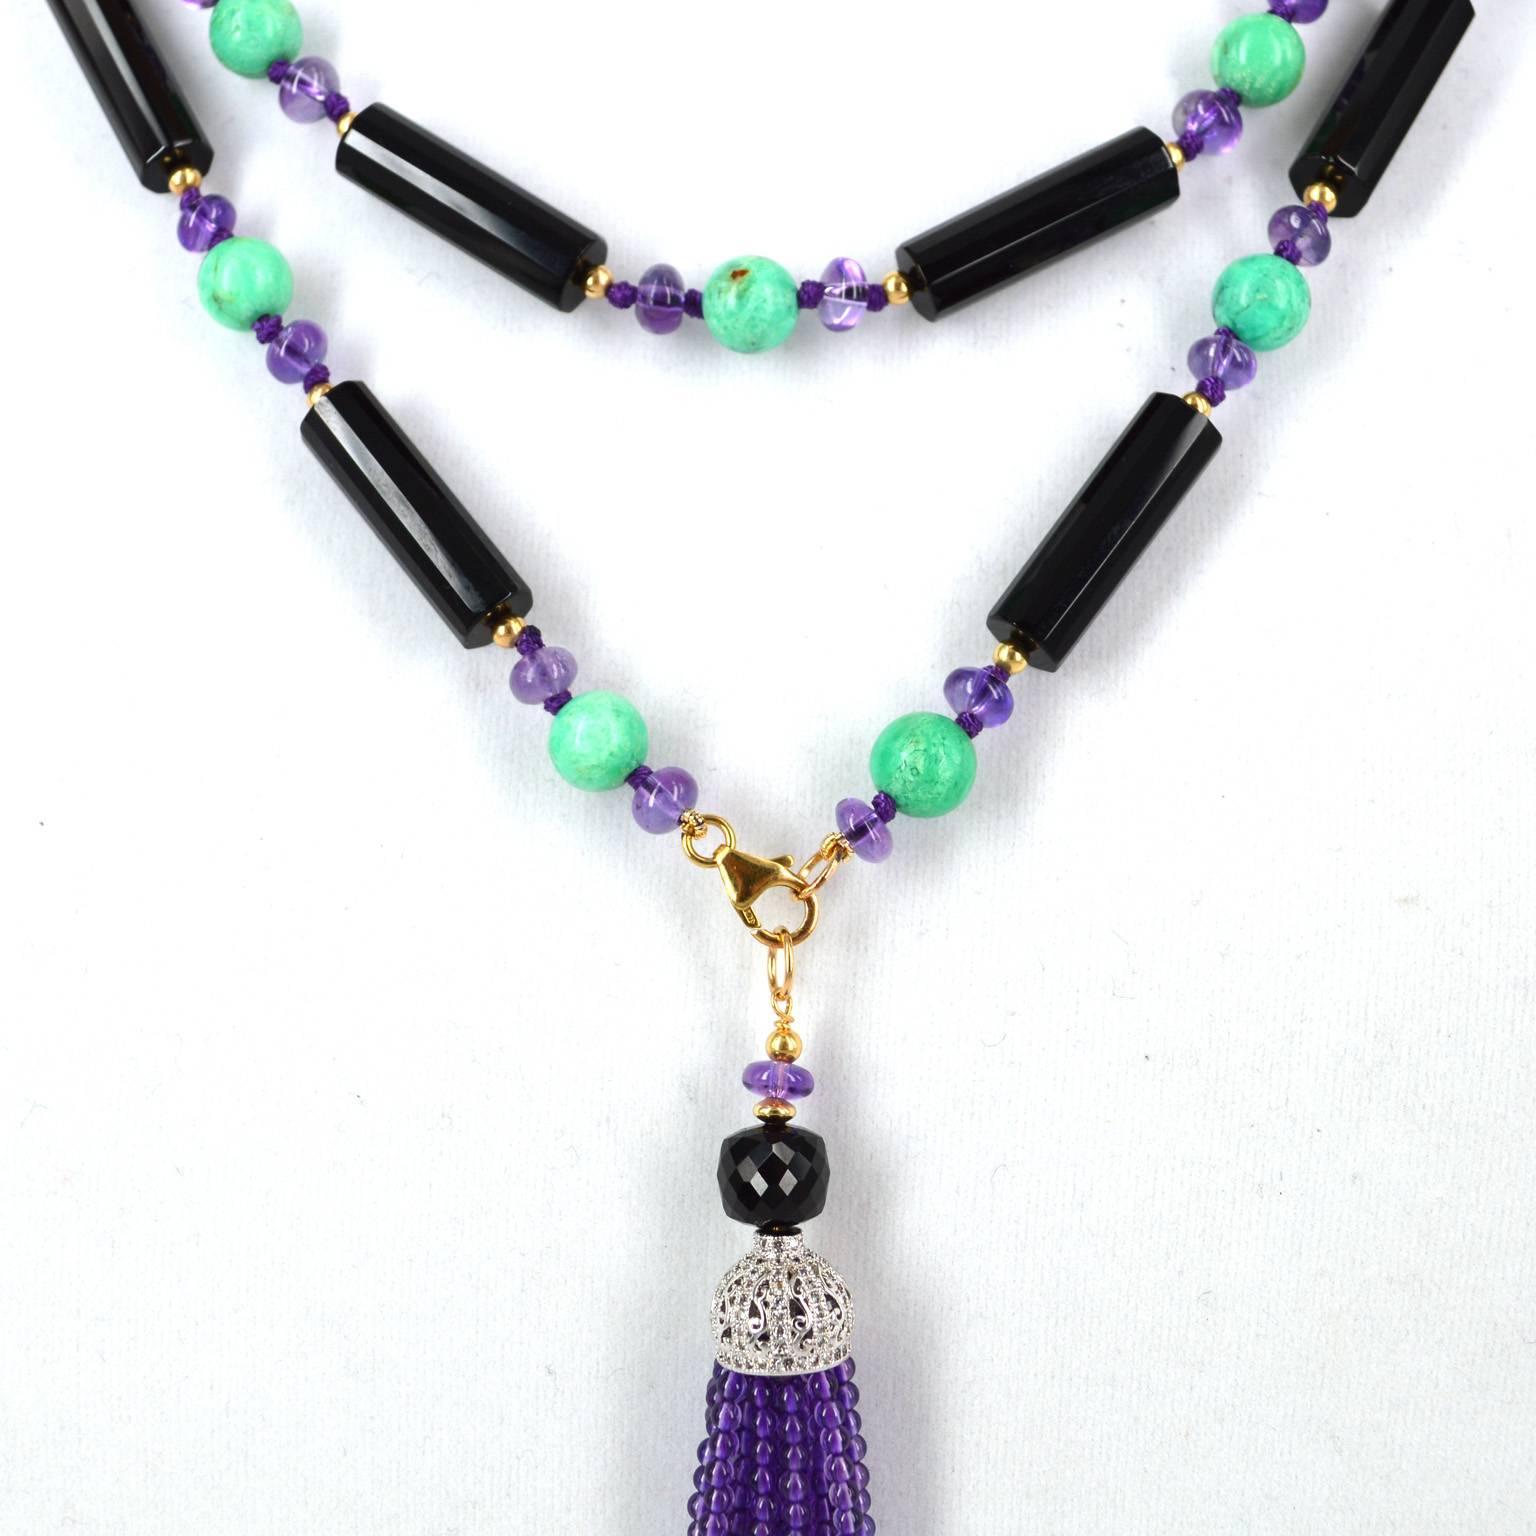 Stunning Sautoir Necklace with detachable tassel, necklace is made from faceted Onyx tubes 7x24mm and is spaced with 3mm 14k Gold Filled beads 6x4mm polished Amethyst roundels and 8mm Australian Chrysophase, hand knotted on purple thread. Detachable